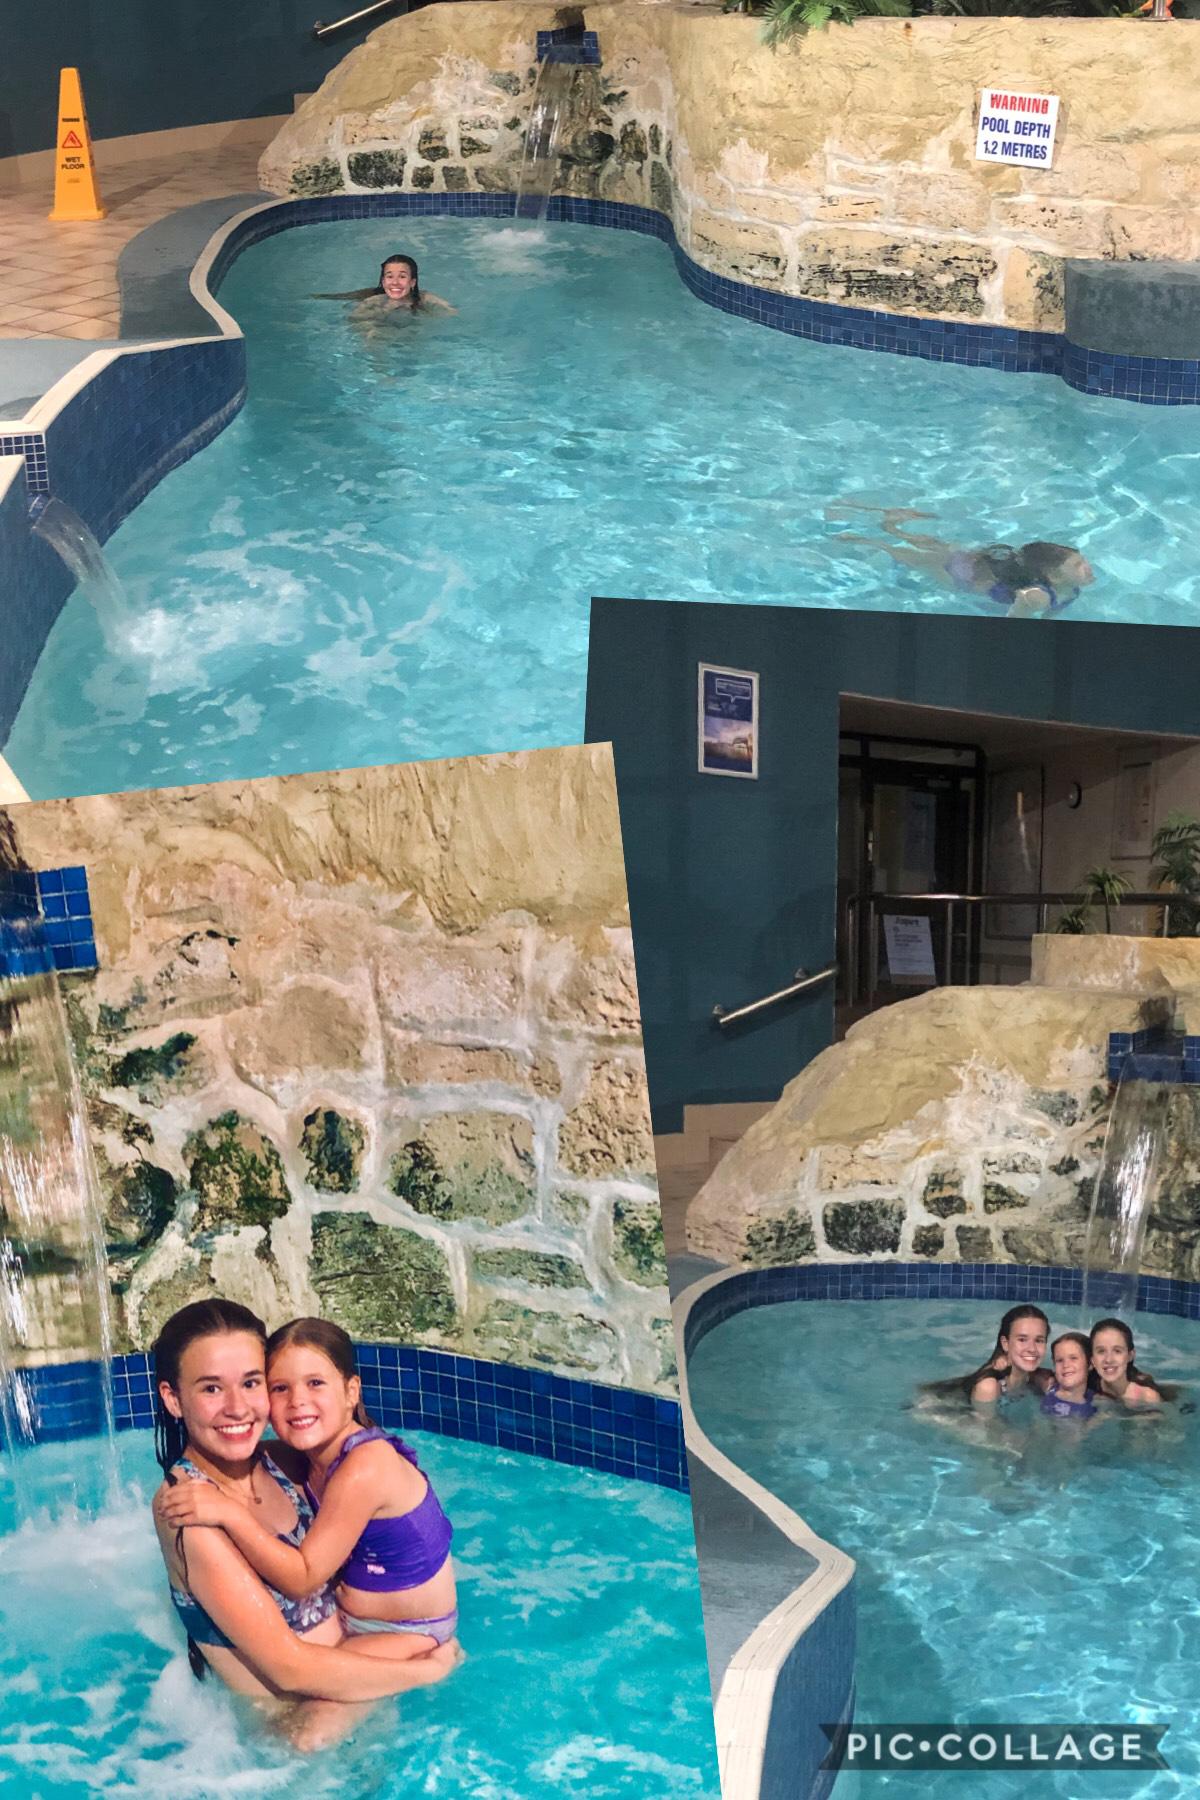 just a few photos from our holiday in Mandurah!! The resort was amazing. There was an indoor pool and an outdoor pool with spas, tennis courts, mini golf, a games room and the beach was a 2 minute walk away! ⭐️